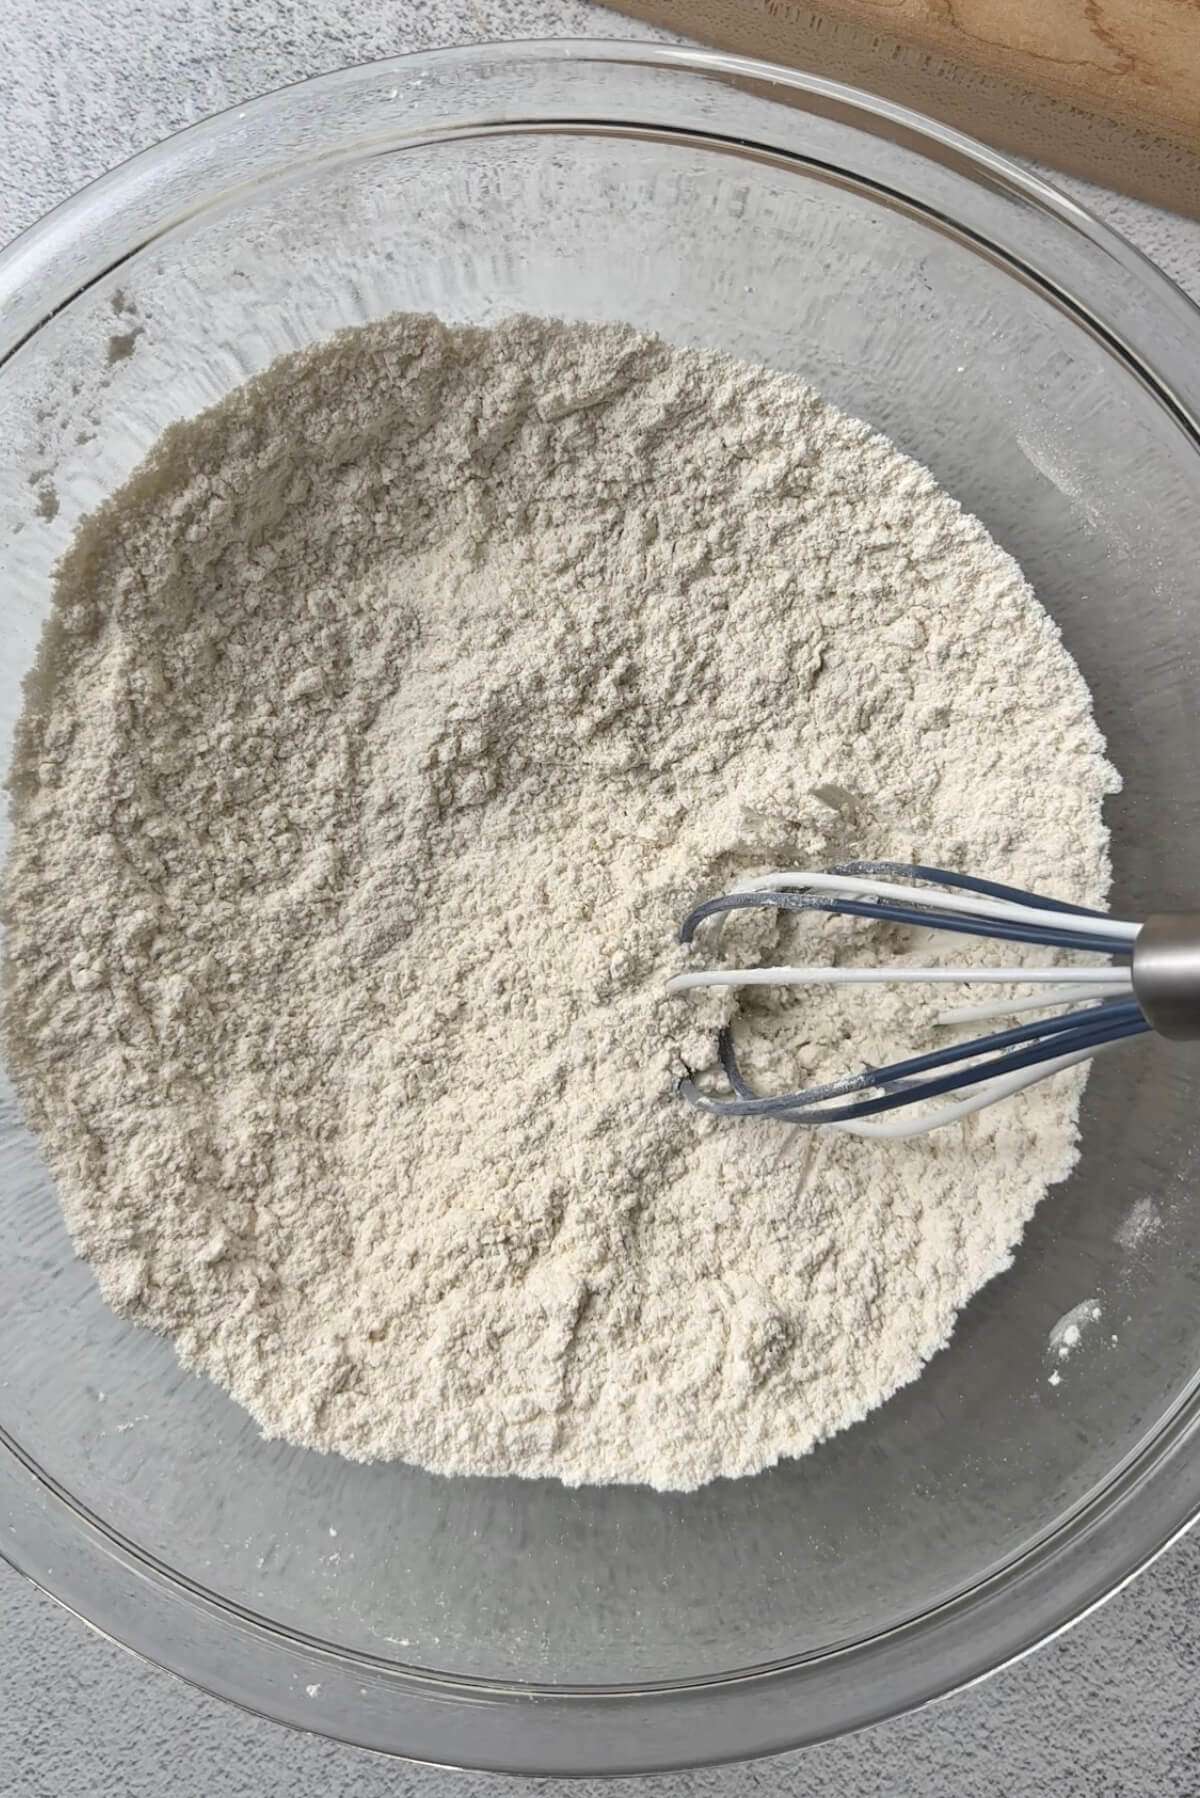 flour, baking powder, and salt in a clear mixing bowl with whisk